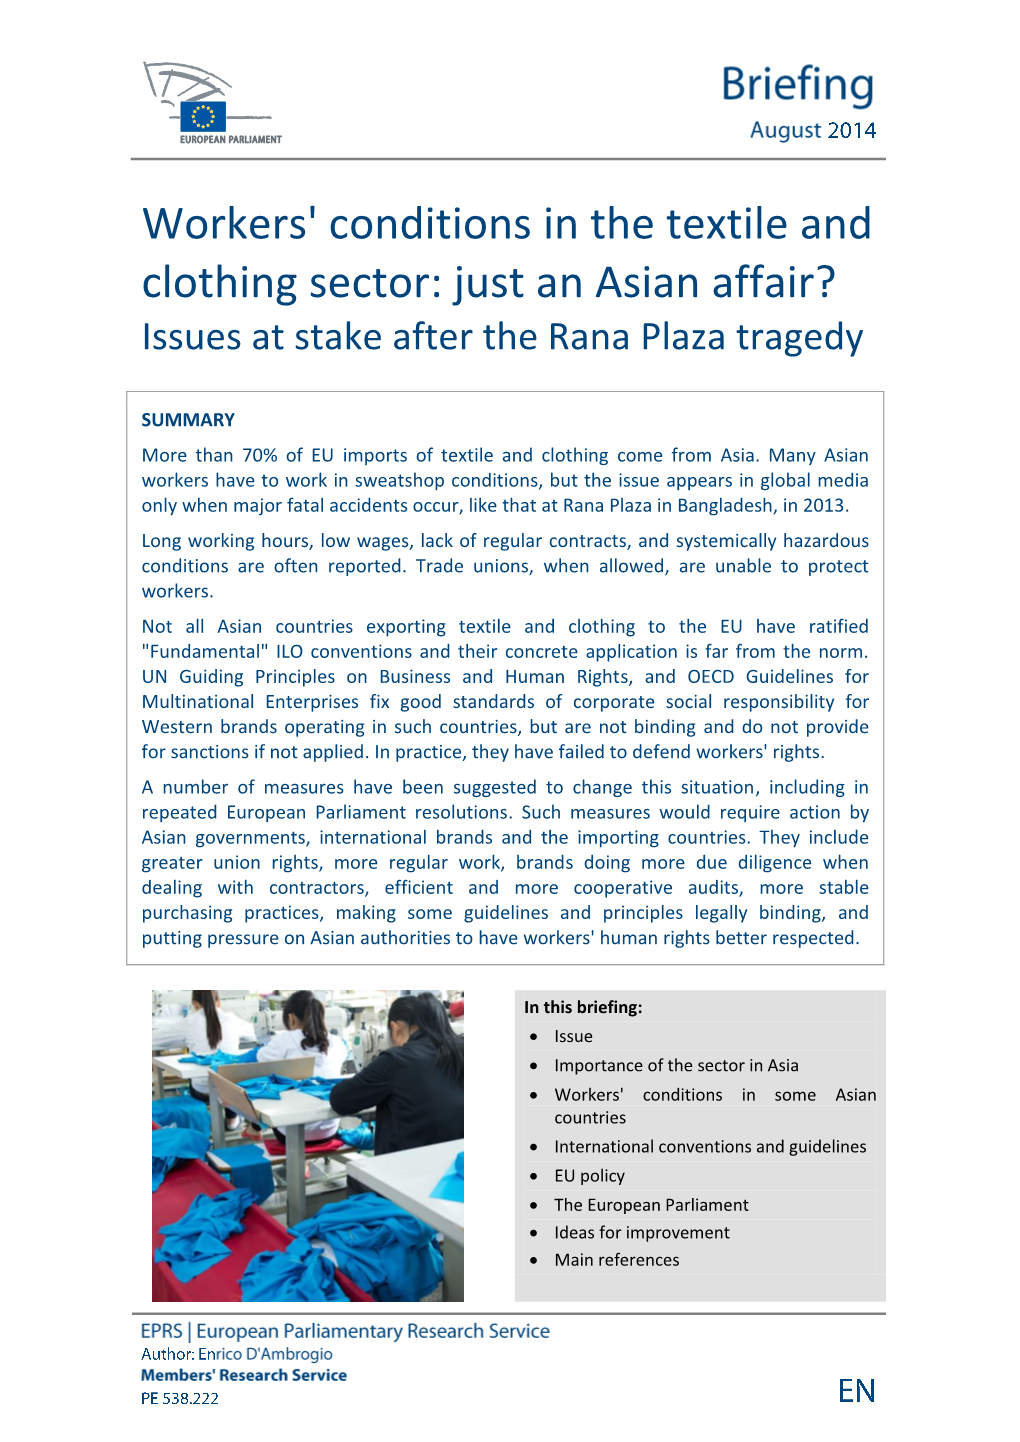 Workers' Conditions in the Textile and Clothing Sector: Just an Asian Affair? Issues at Stake After the Rana Plaza Tragedy